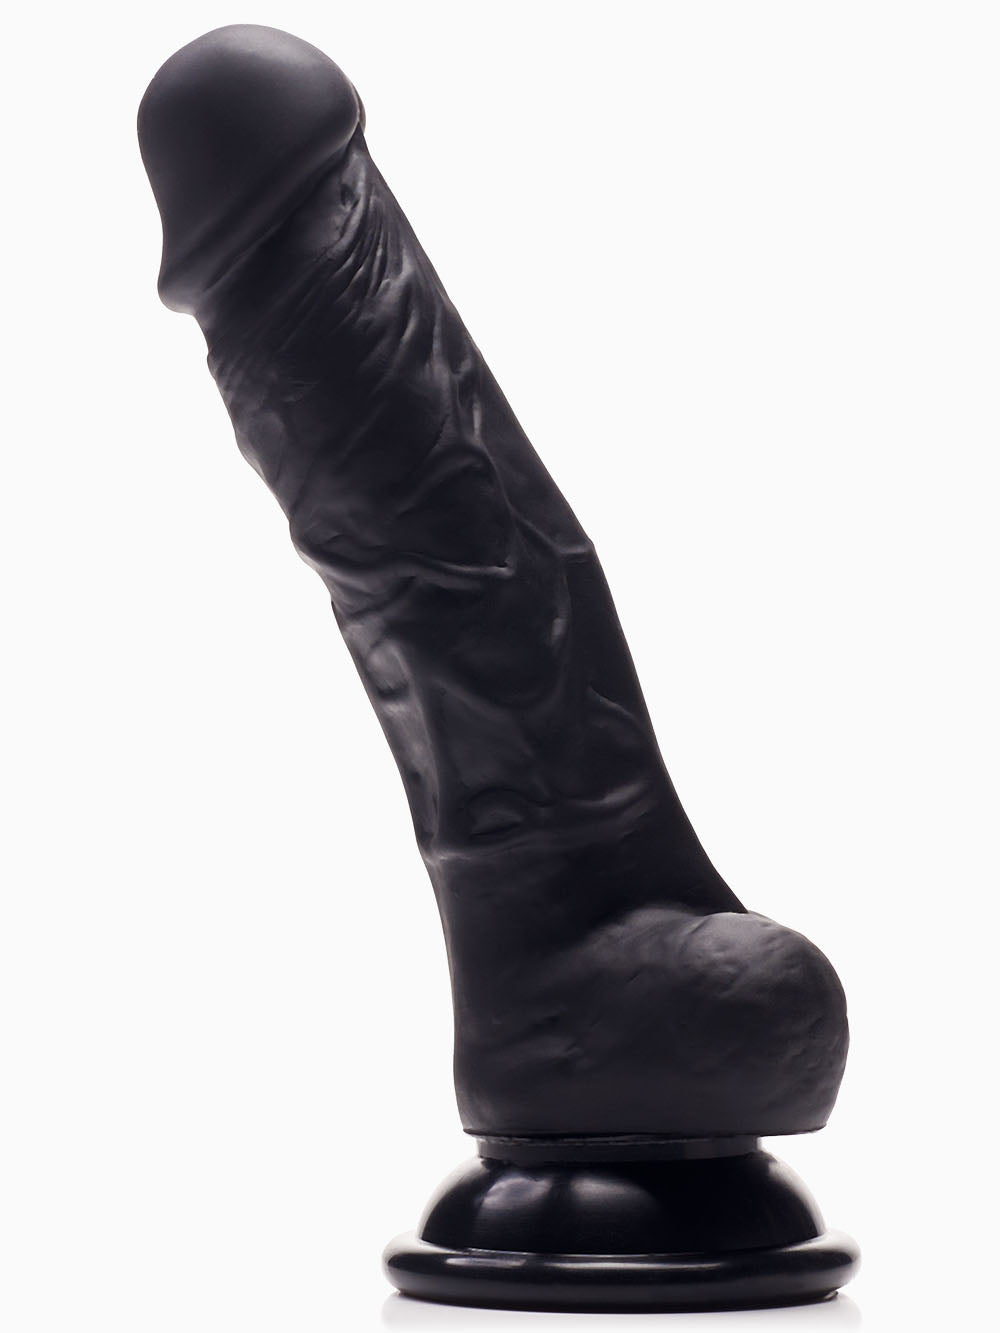 Pillow Talk Suction Cup Dildo, 7 Inches, Black